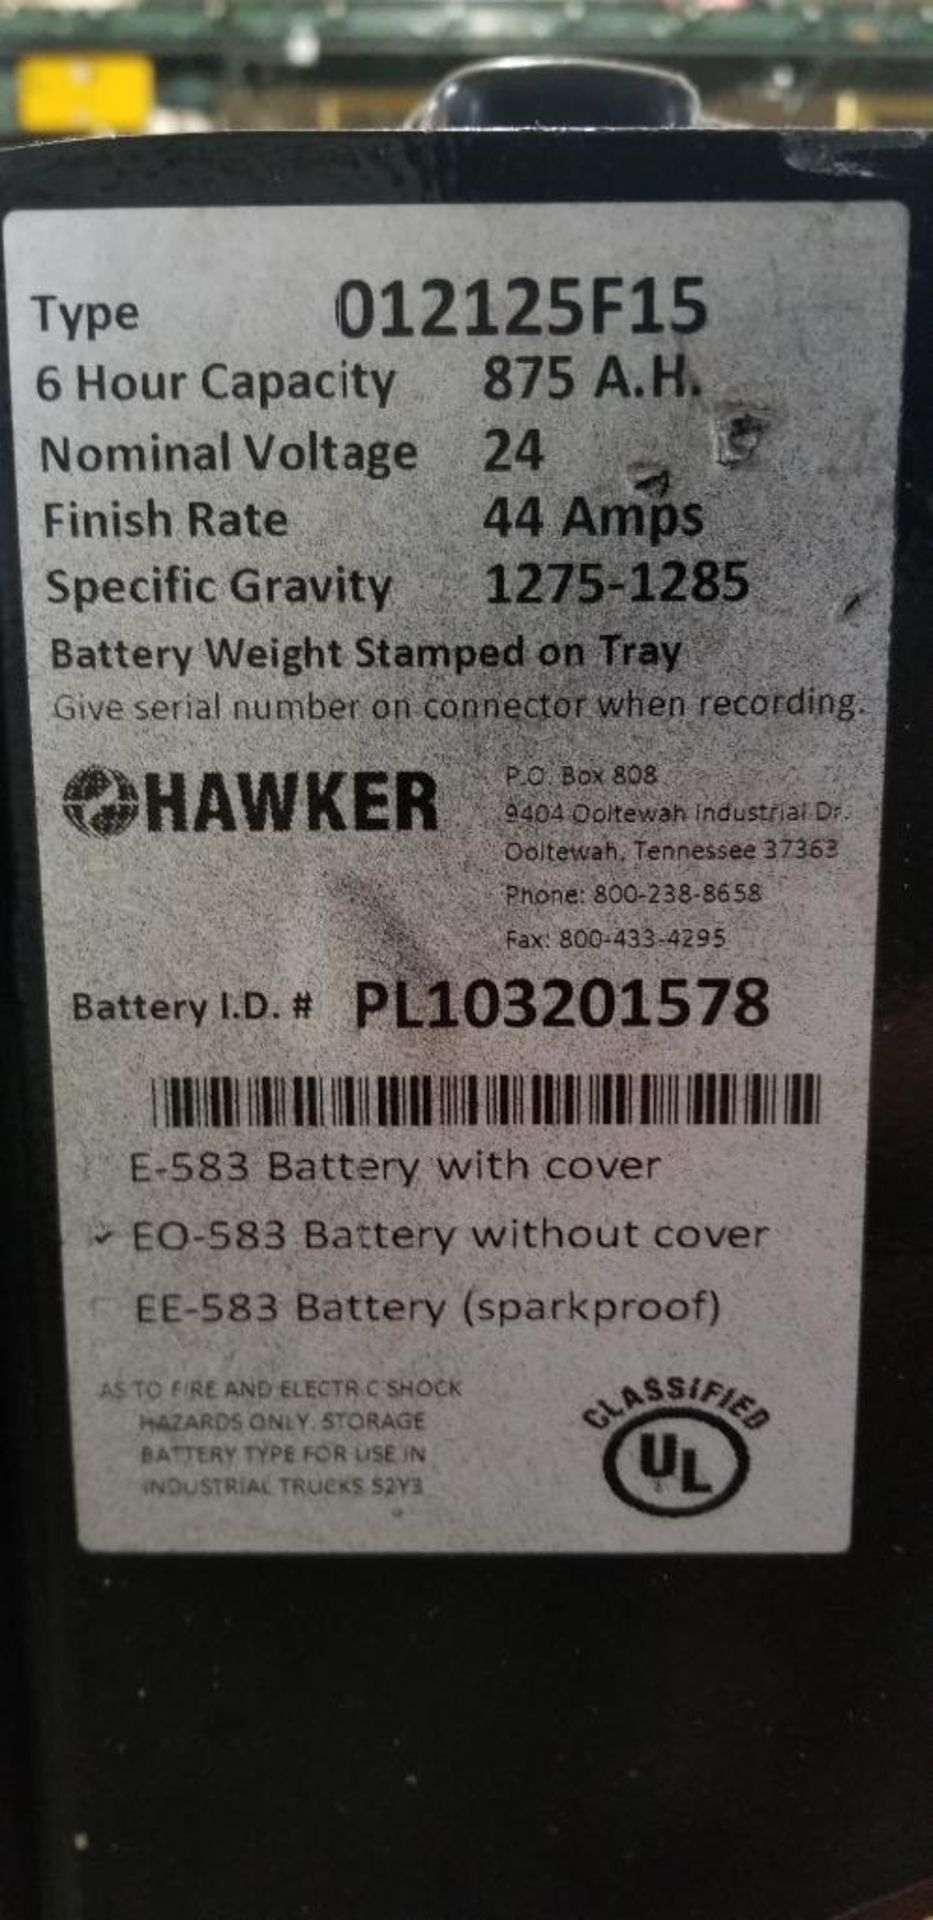 (2x) Hawker Powerline Batteries, 24V, 875A.H., Battery Weight: 1,713 & 1,769 LB., L36"xW14"xH31" ($5 - Image 4 of 7